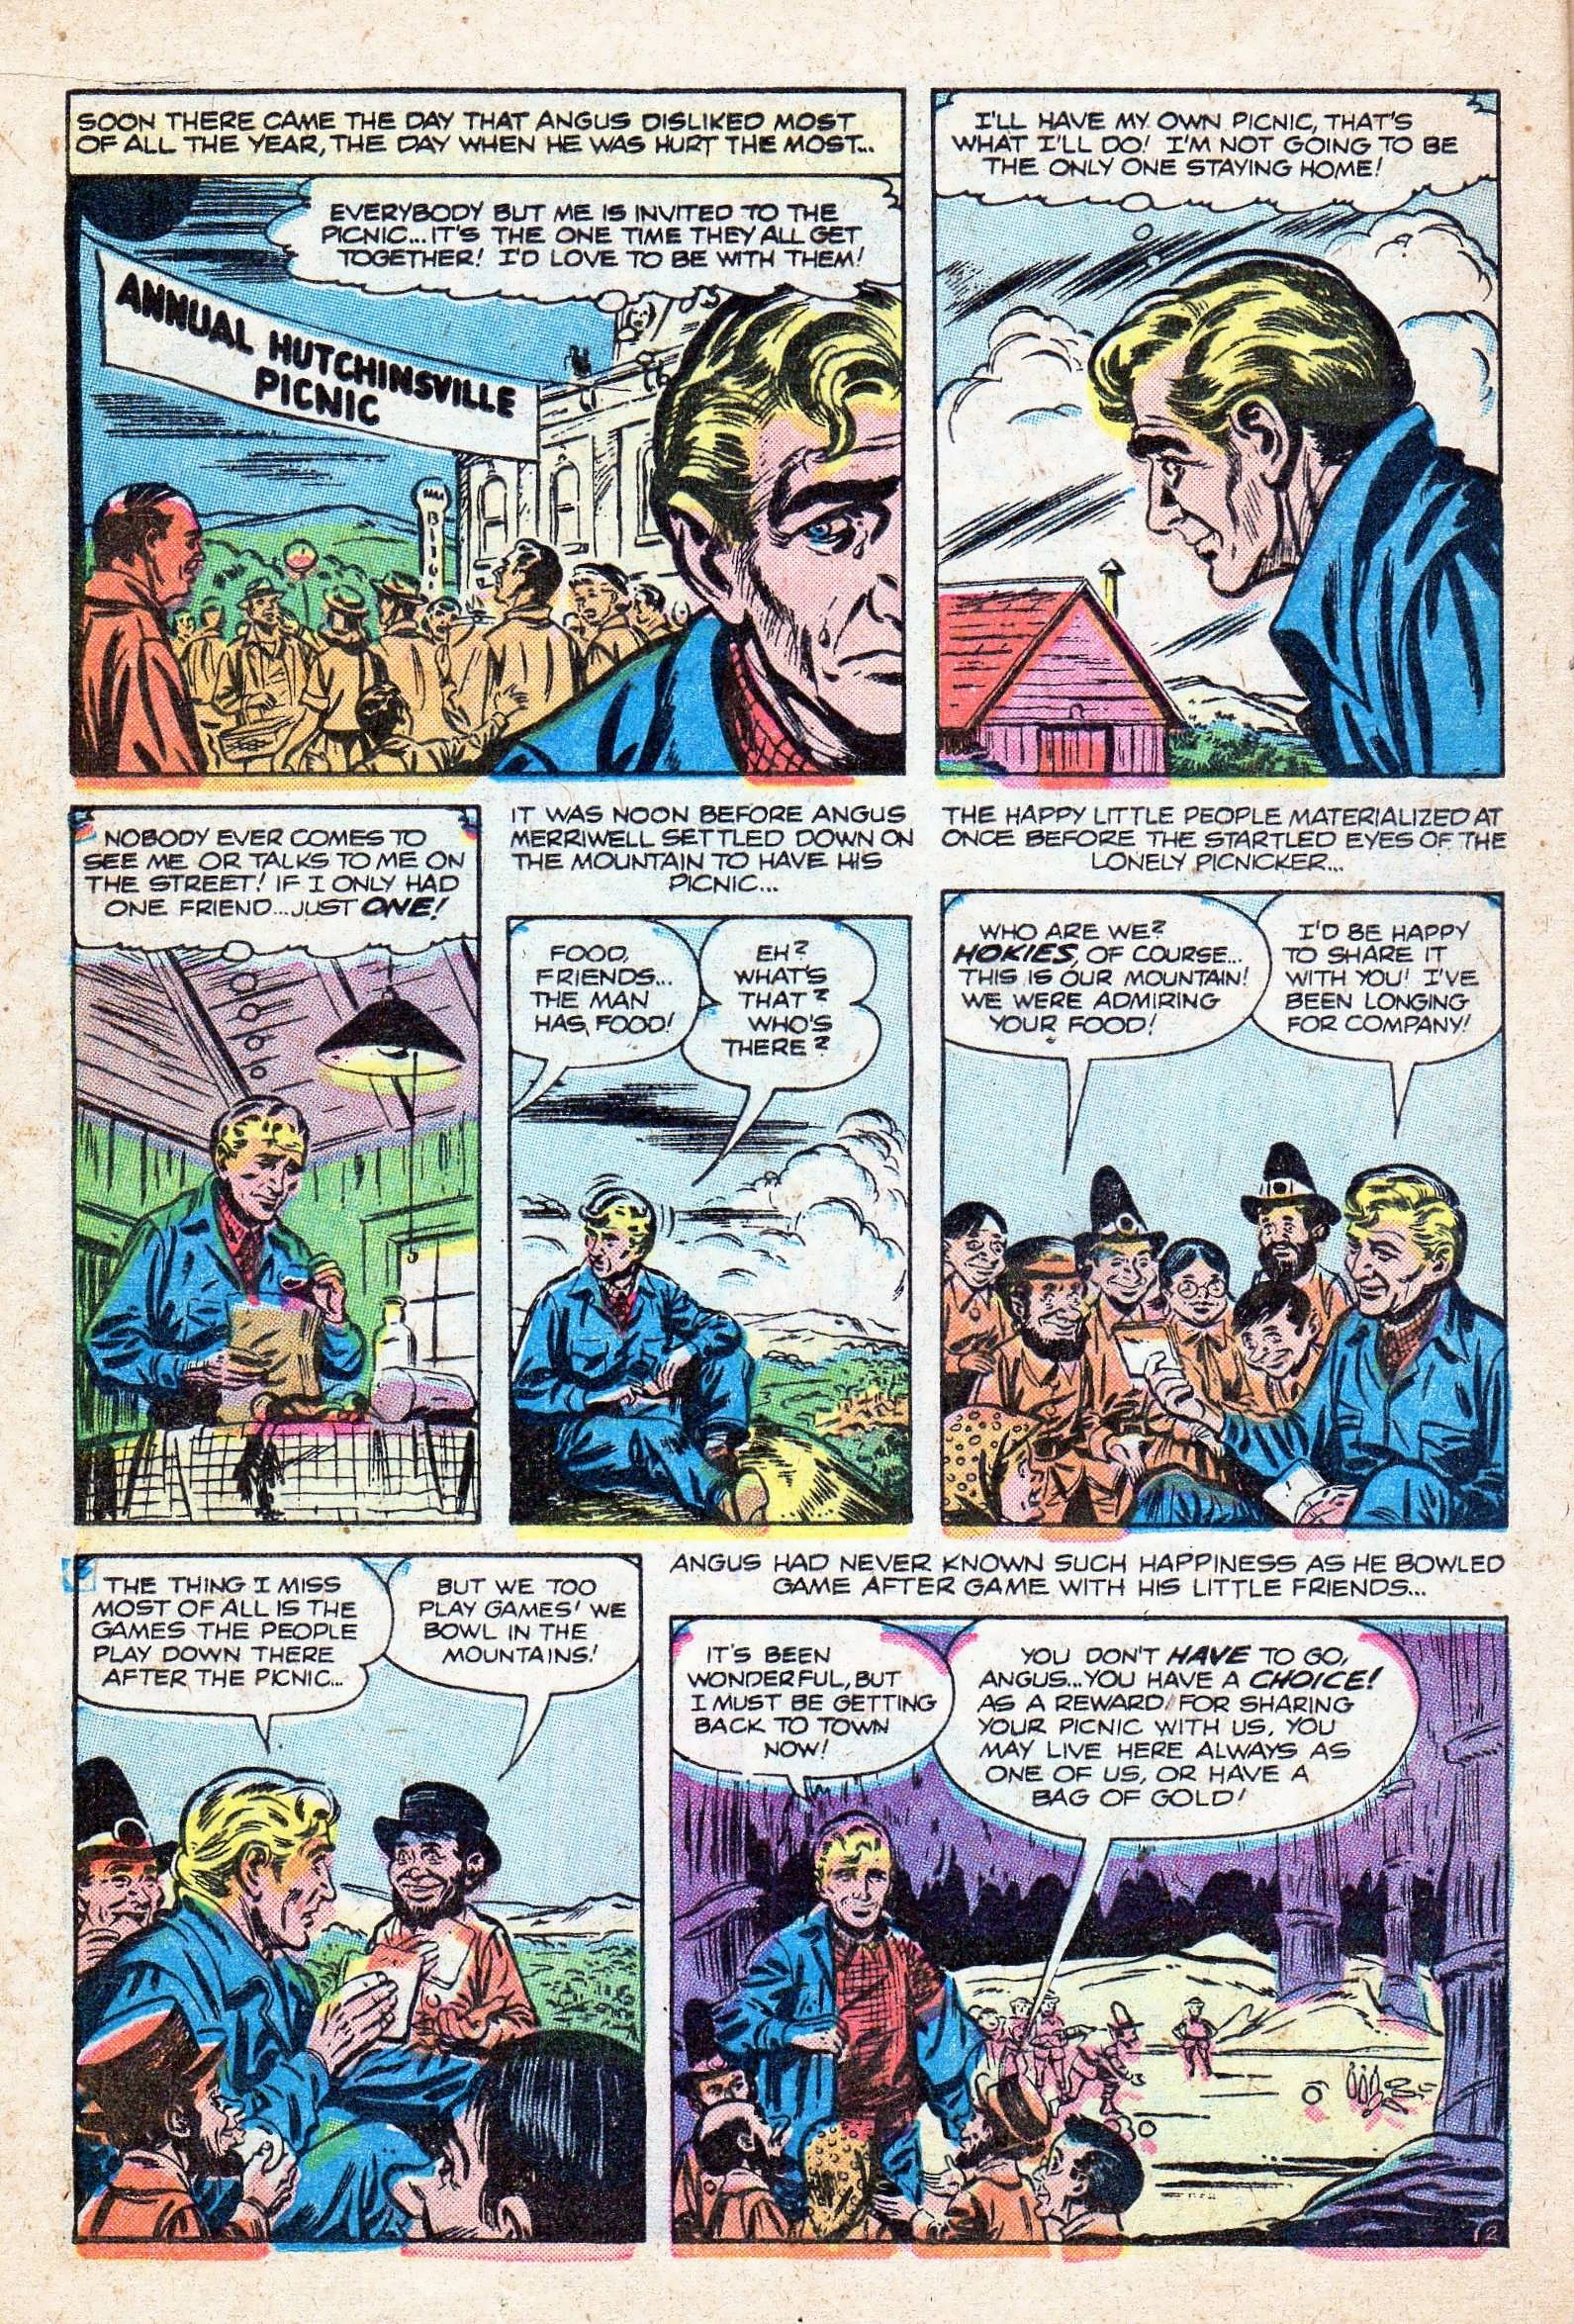 Marvel Tales (1949) 145 Page 22